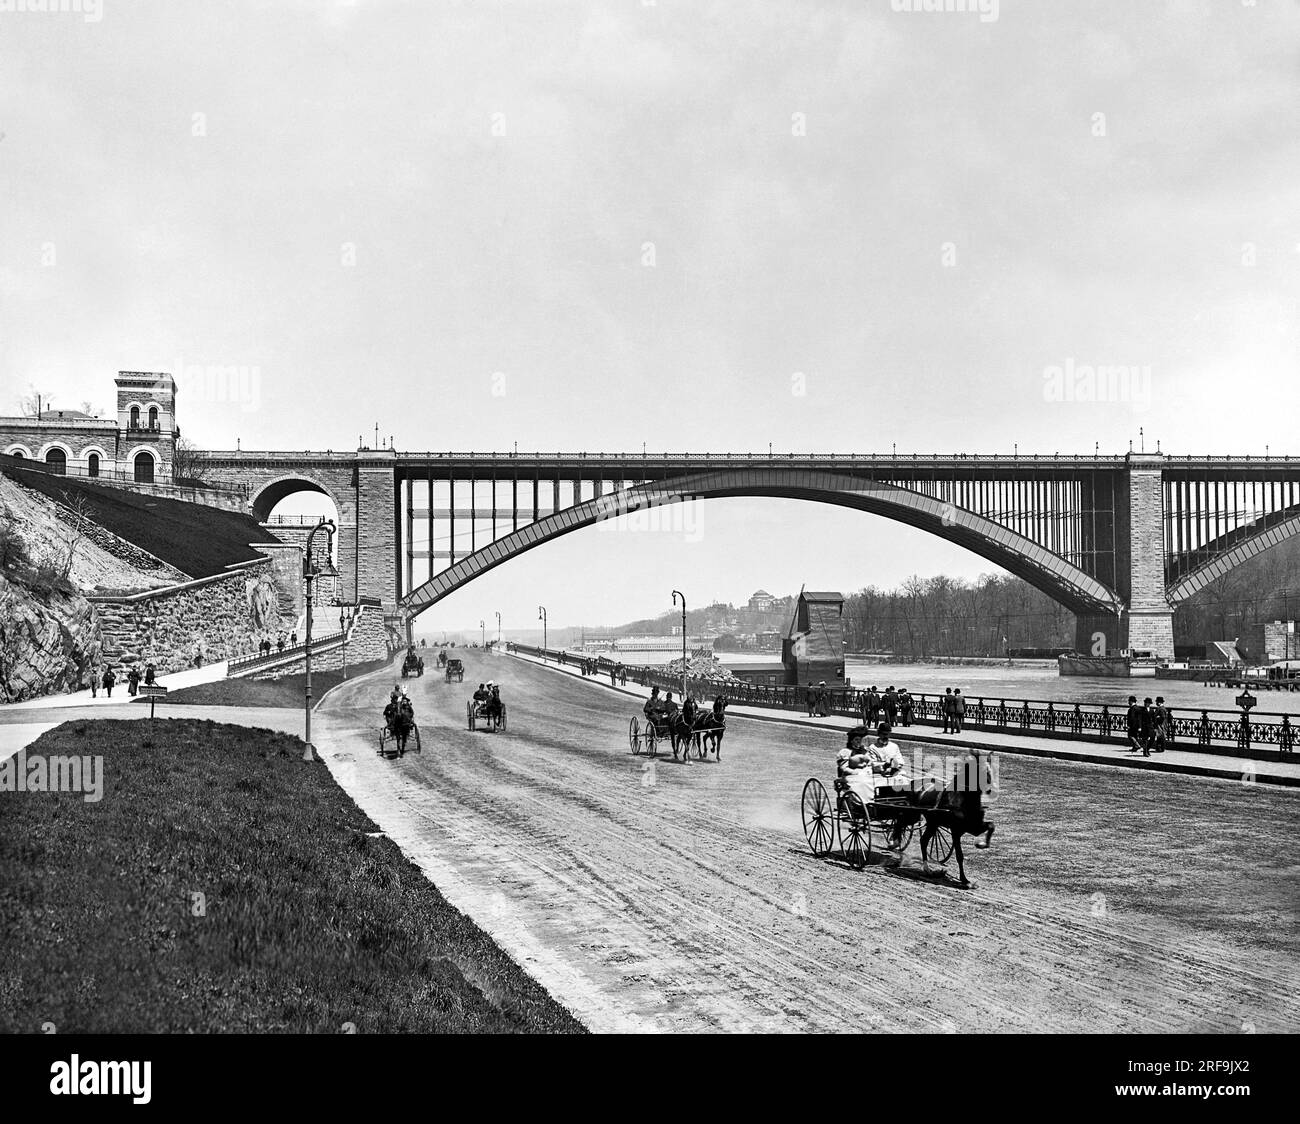 New York, New York:  c. 1901 A view of the Harlem River Speedway with the Washington Bridge in the background. It was initially open only to carriages and sulkies so the wealthy could parade their trotting horses down the 2.5 mile dirt roadway. Pedestrians, horseback riders, and cyclists were prohibited. Stock Photo